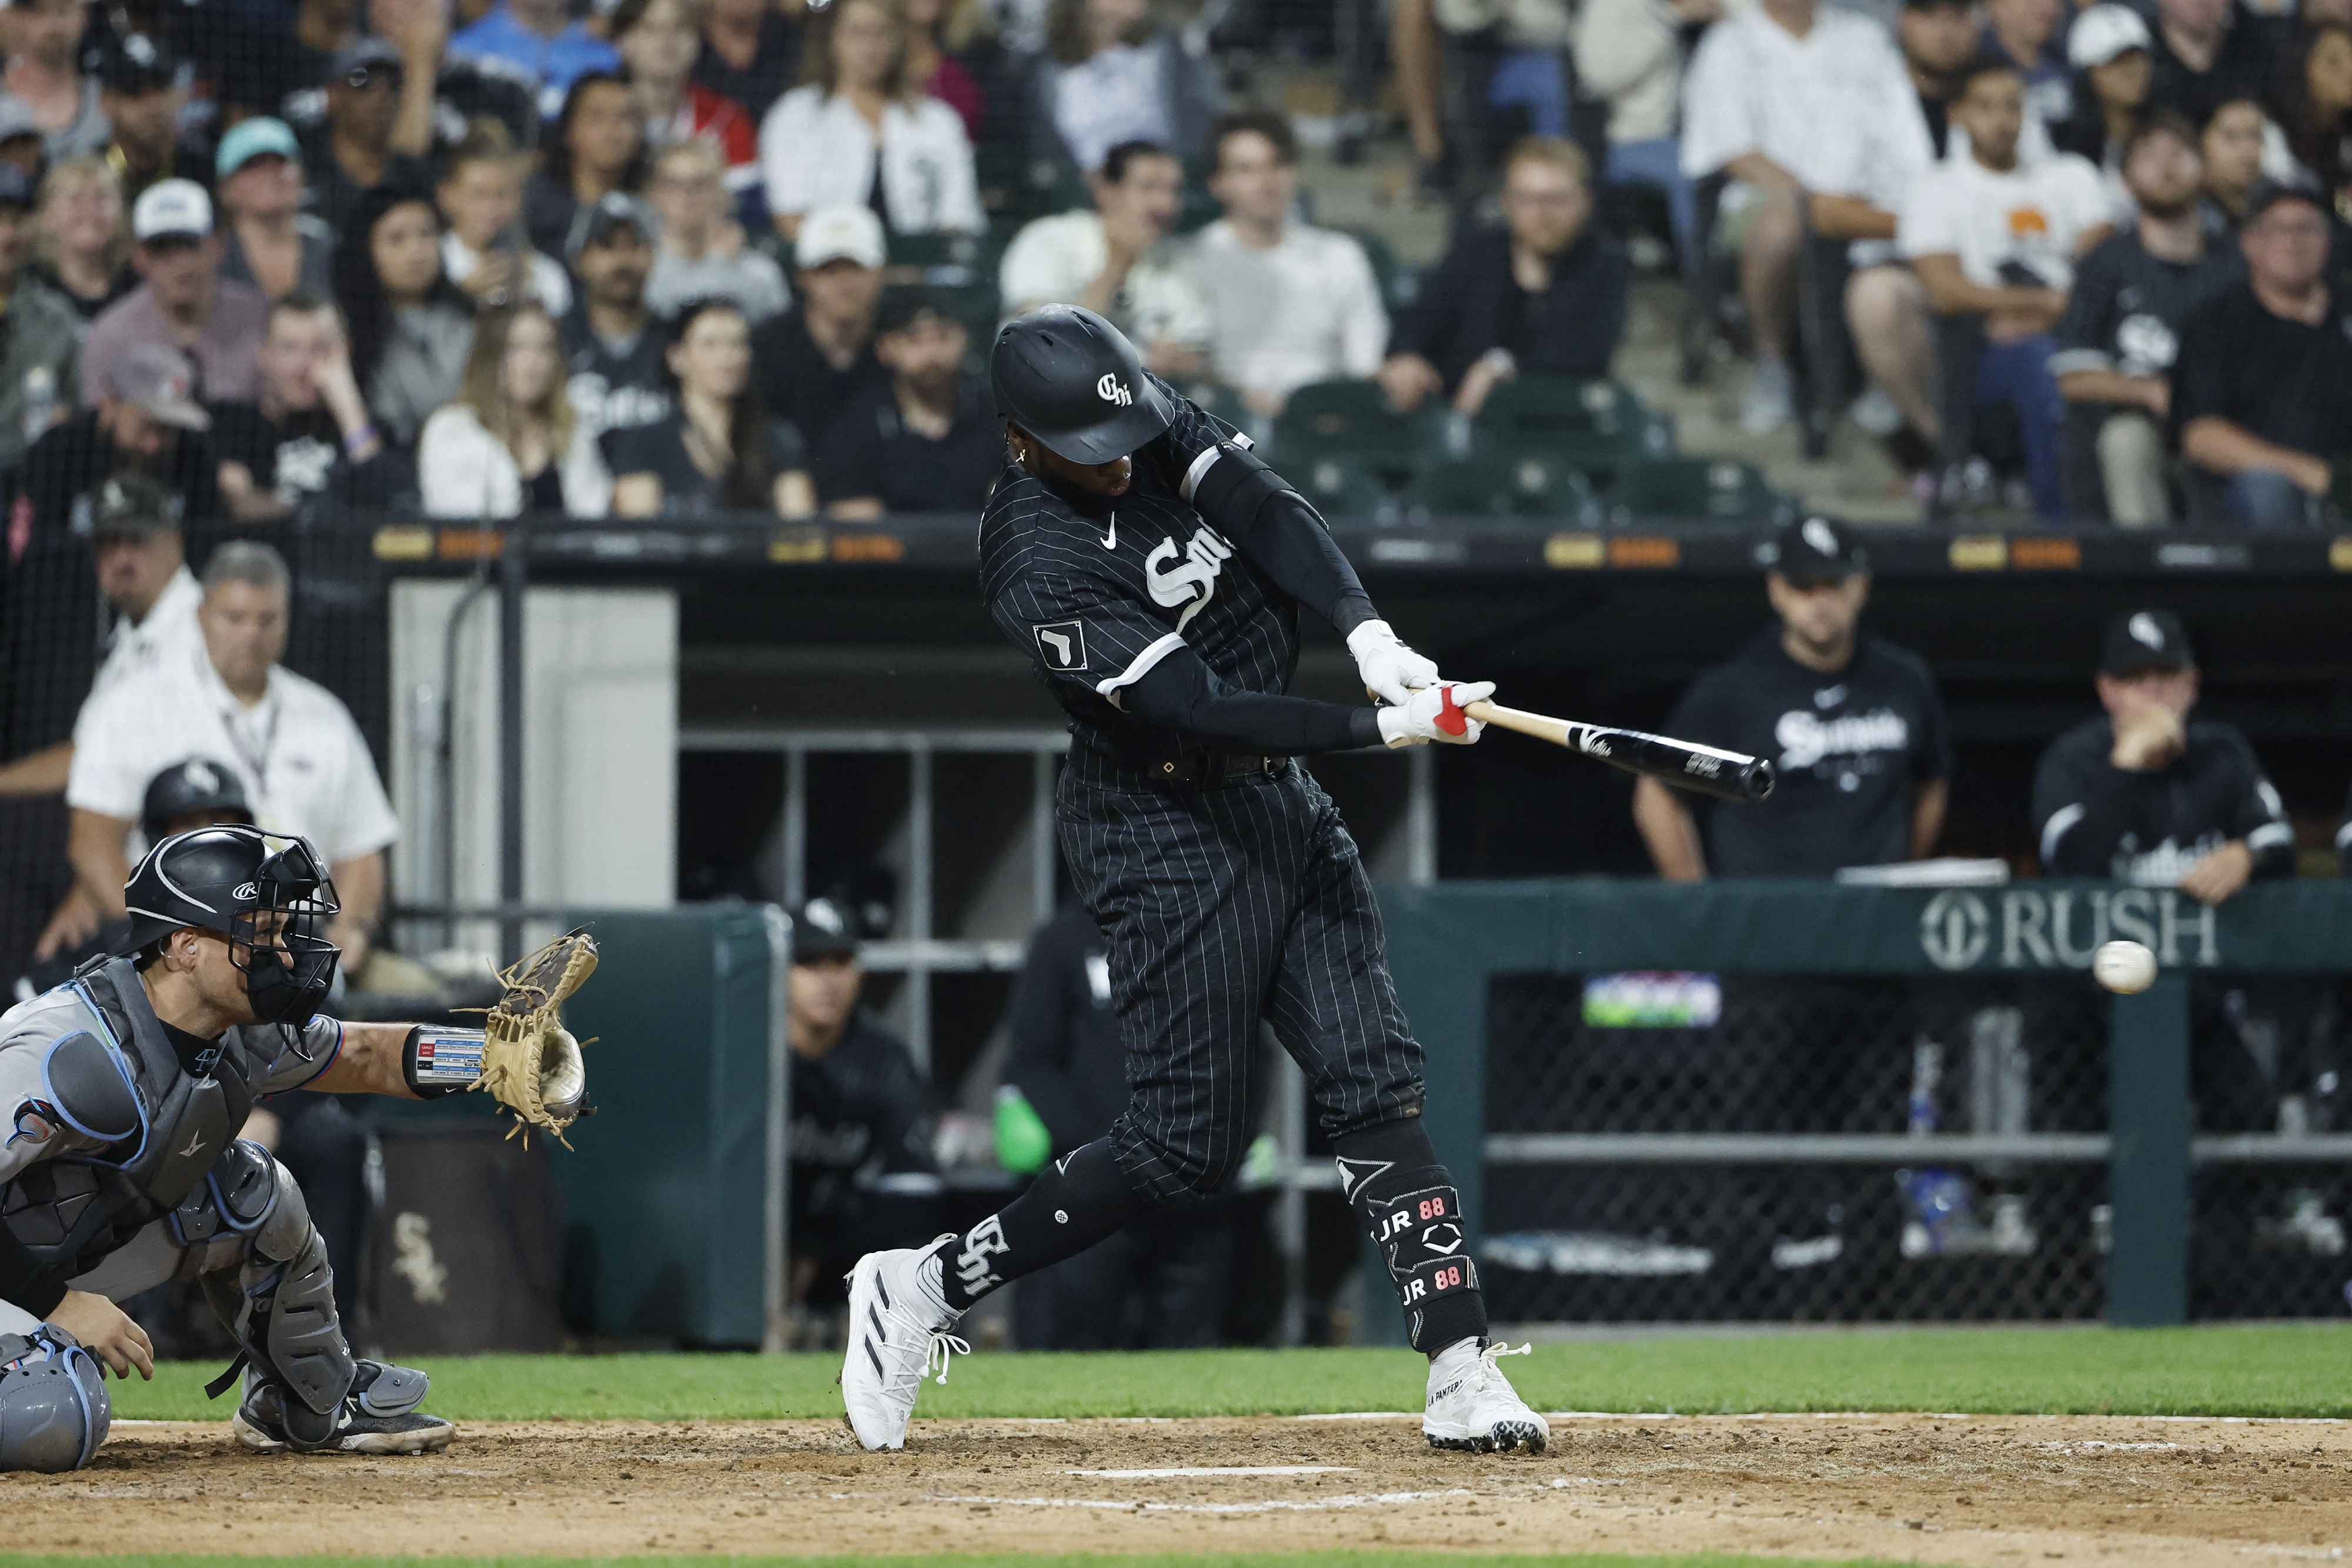 Luis Robert Jr.'s walk-off single gives Chicago White Sox their 6th win in  last 7 games to stay 3½ games out of 1st in AL Central